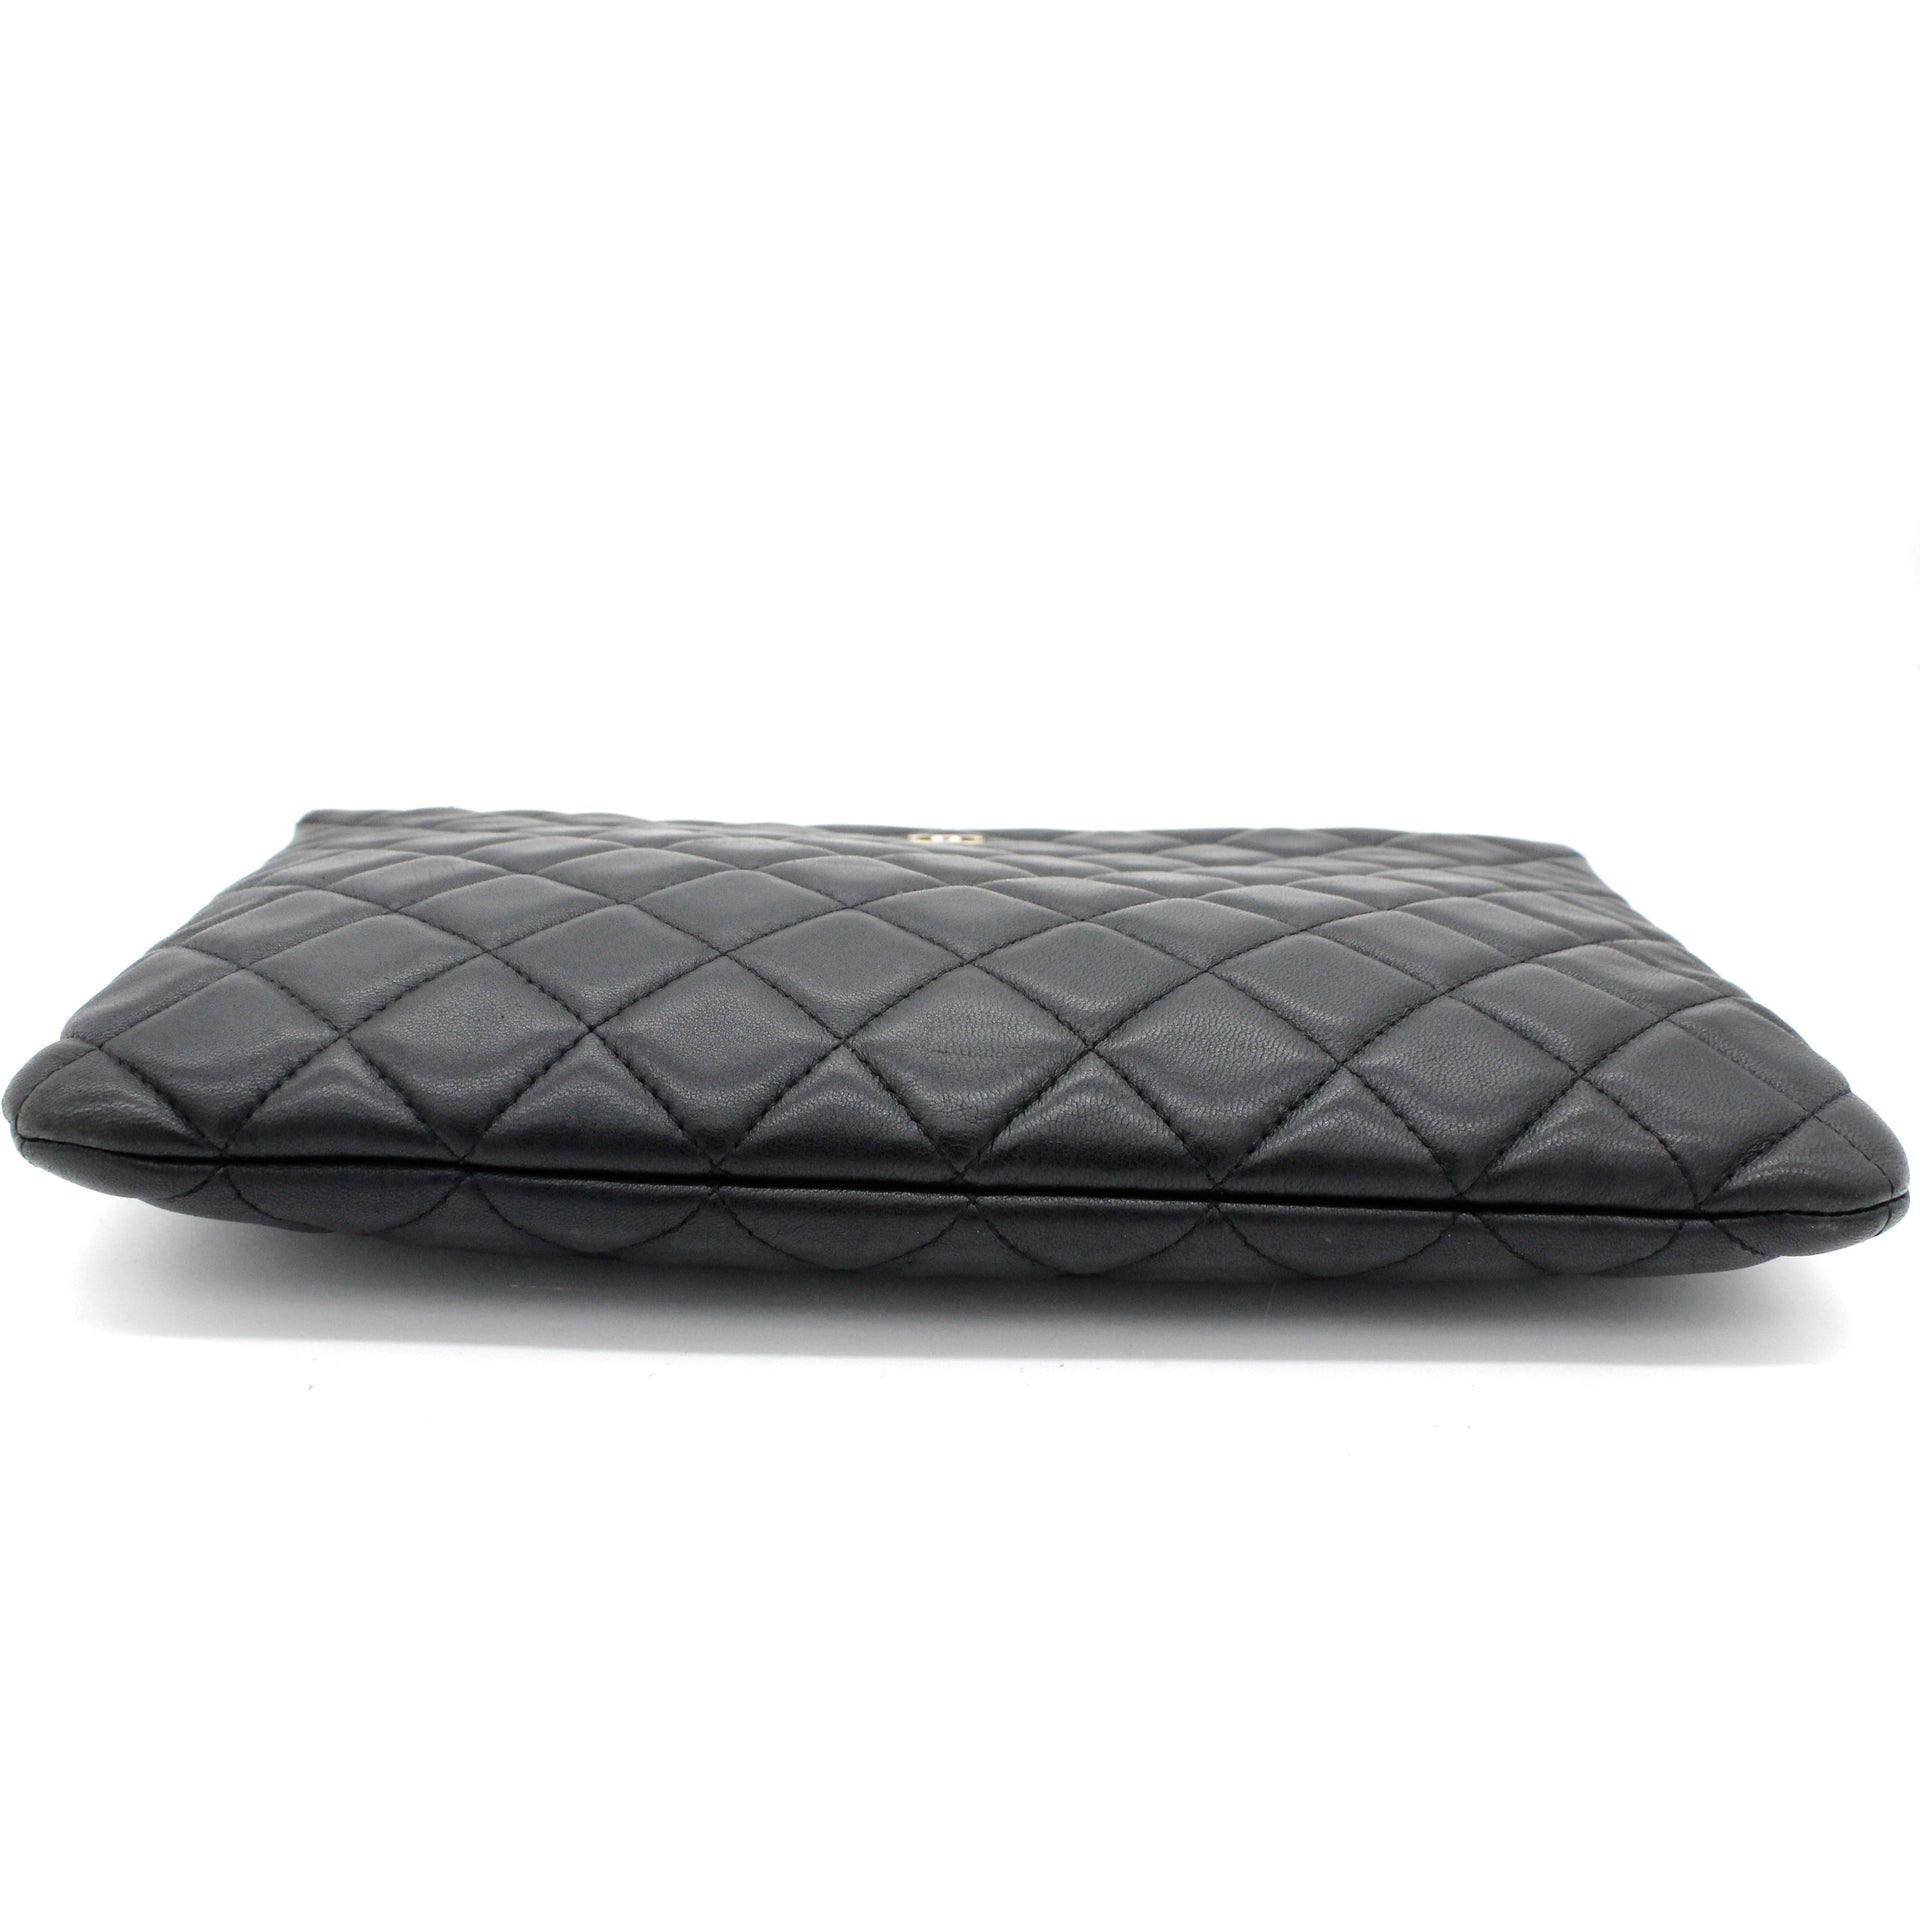 Black Quilted Lambskin Leather Pouch